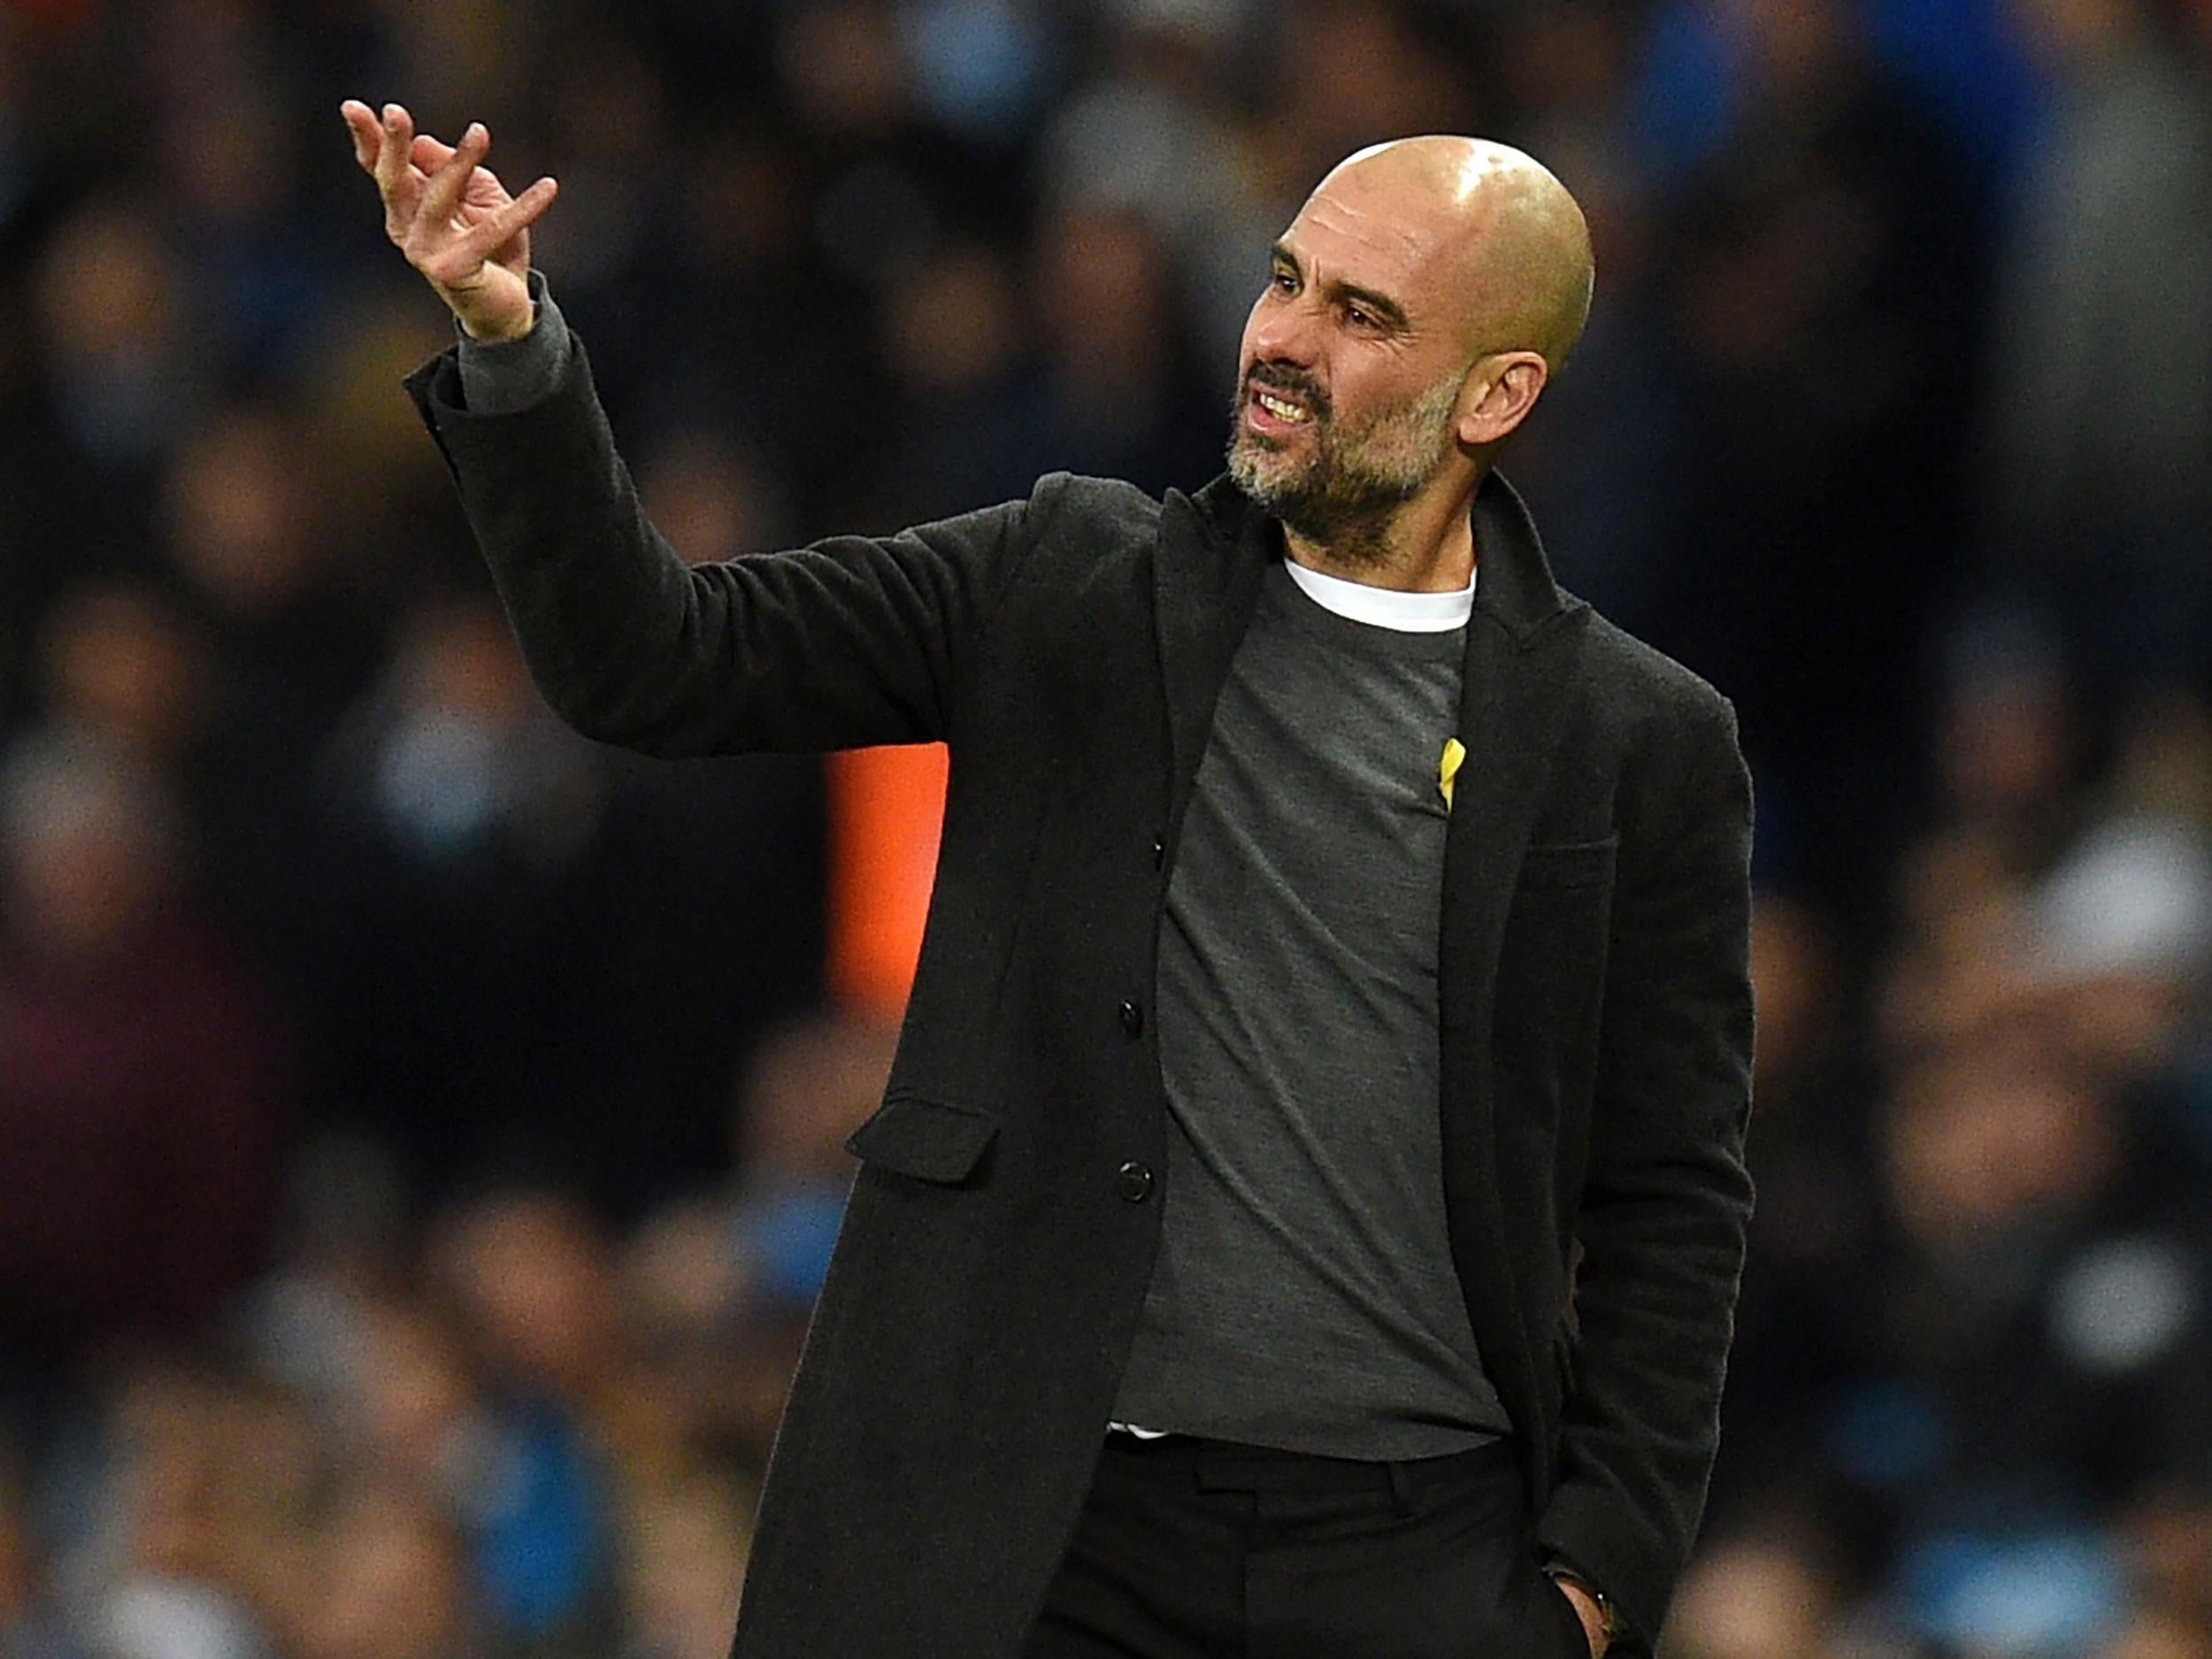 Pep Guardiola criticised his players for ‘forgetting to play’ in the second half against Basel